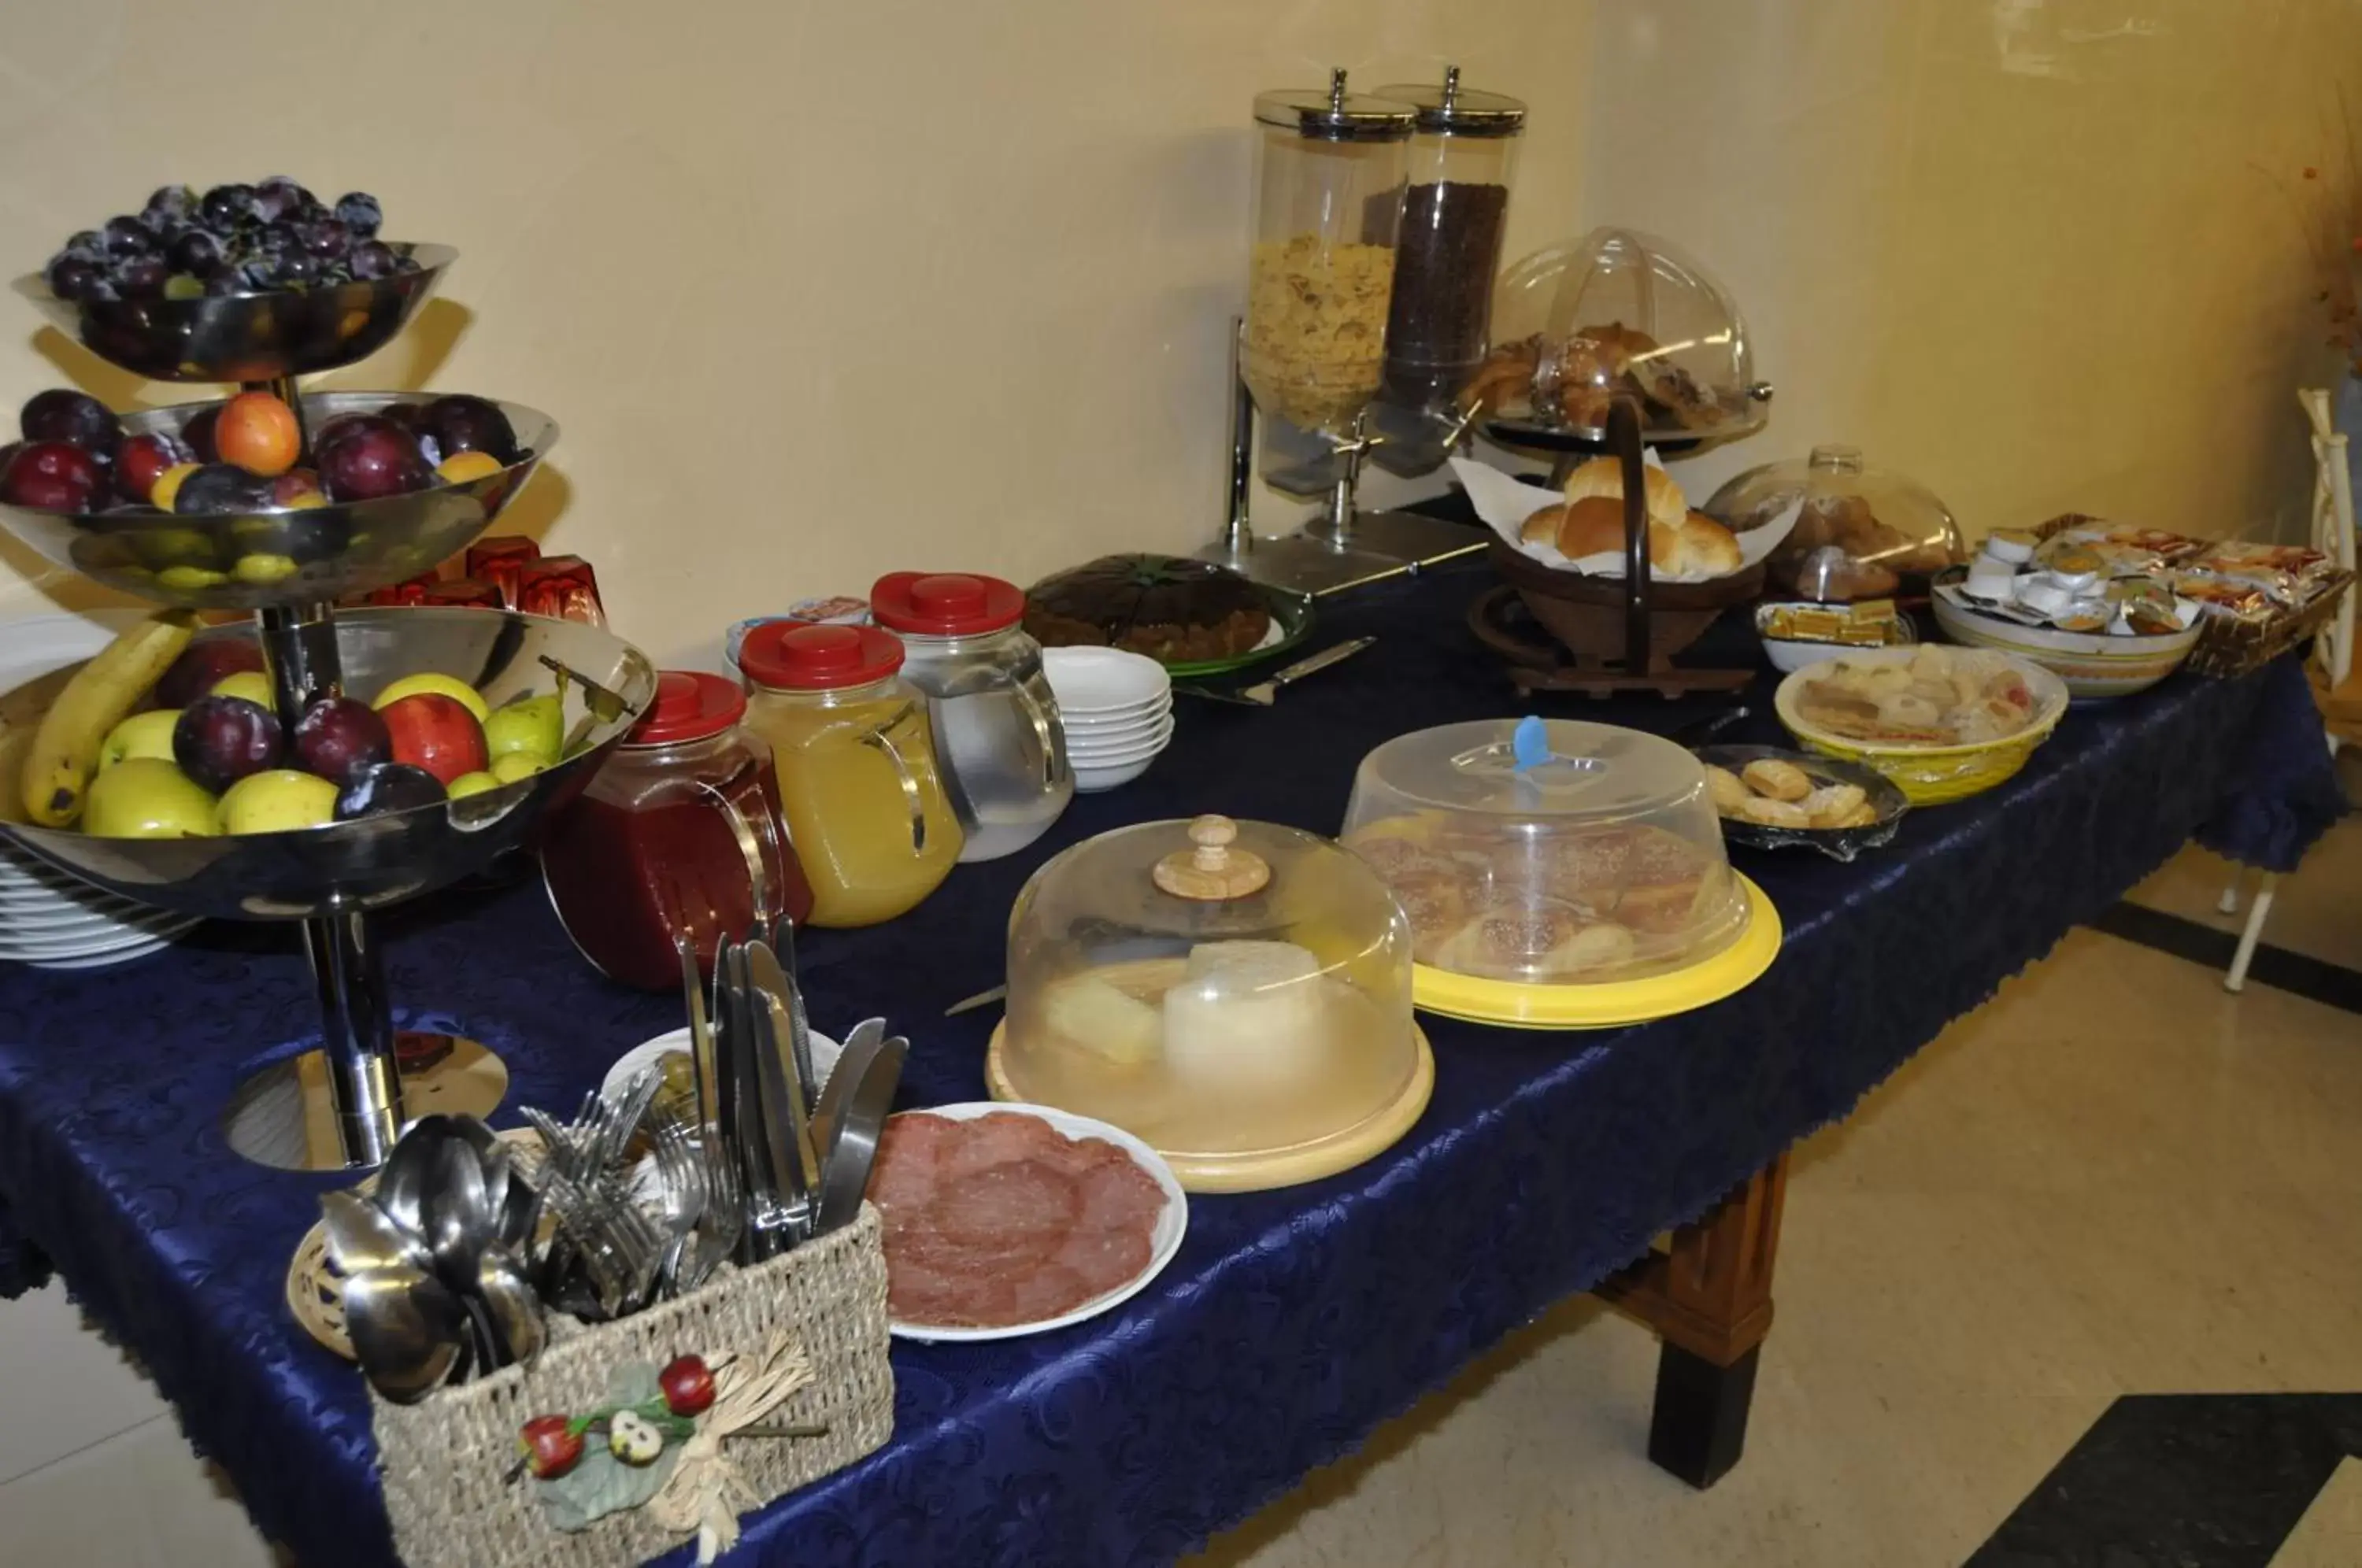 Food and drinks in Al-Tair